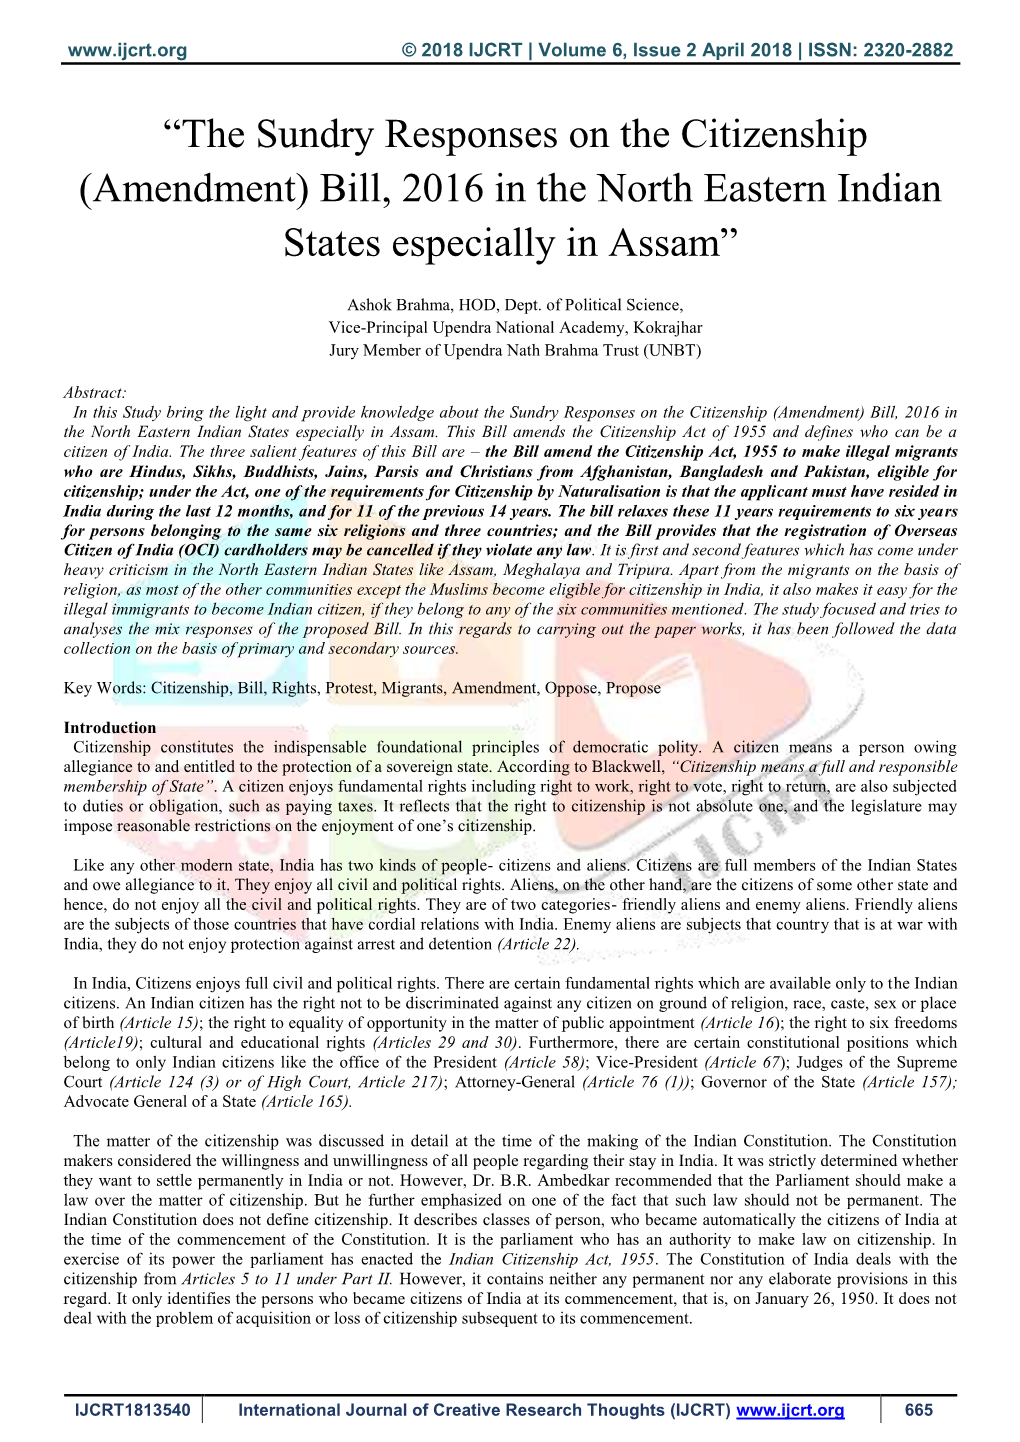 The Sundry Responses on the Citizenship (Amendment) Bill, 2016 in the North Eastern Indian States Especially in Assam”